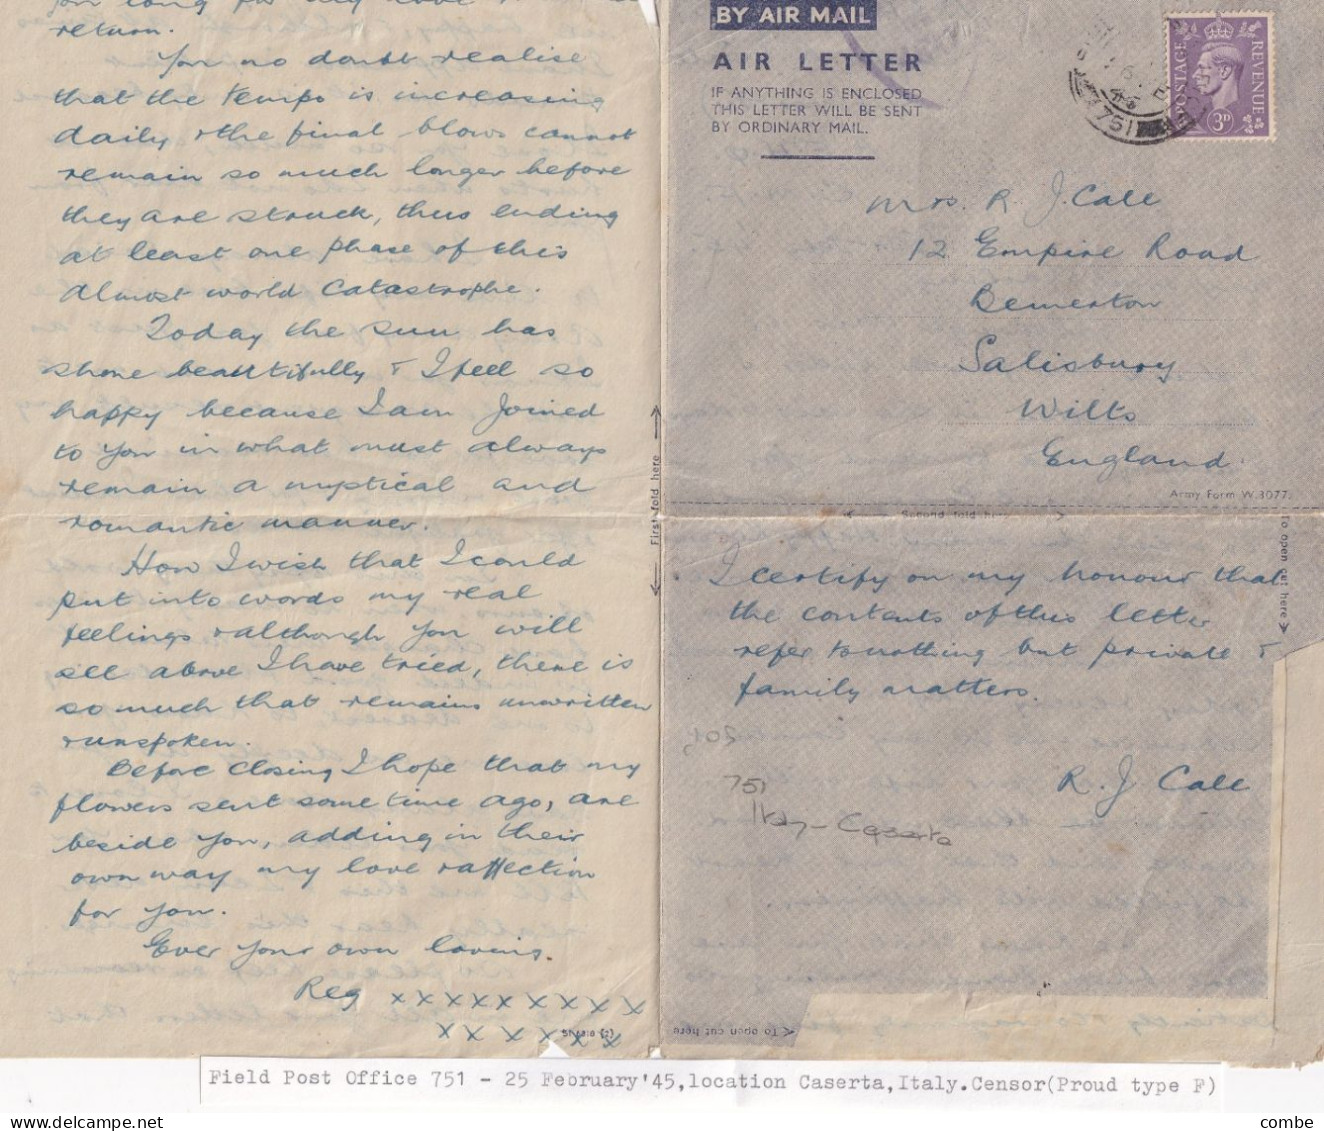 AIR LETTER. GB. FIELD POST OFFICE 751. 25 FEB 45. CASERTA. ITALY. CENSORED - Militaria